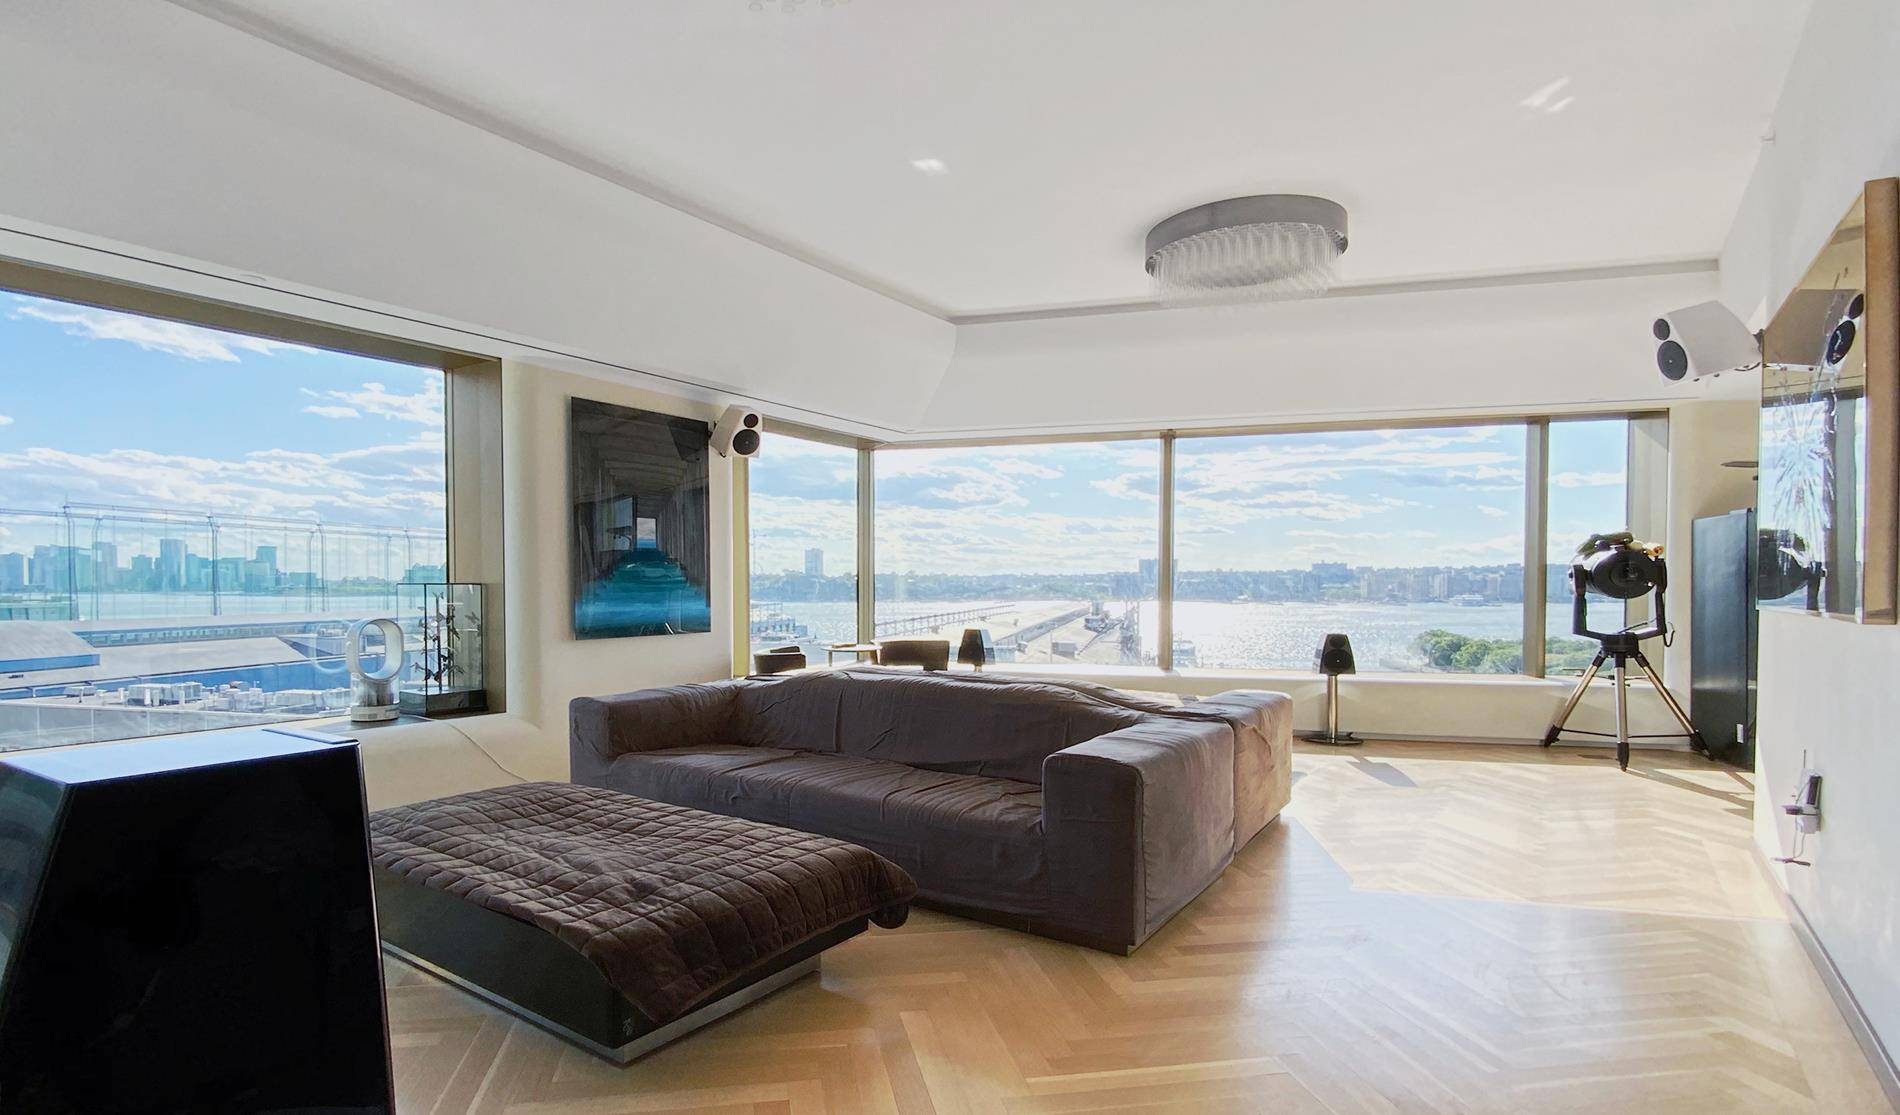 Enjoy the breathtaking views and luxury living at this Norman Foster designed west Chelsea charm.